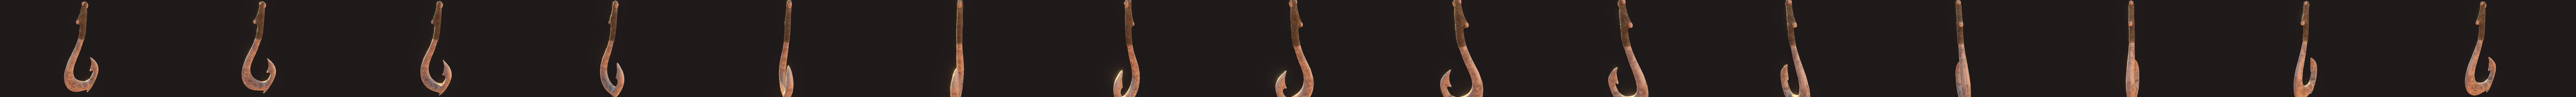 Maui's Fish Hook - Download Free 3D model by chrisfulkerson  (@chrisfulkerson) [14fb82a]